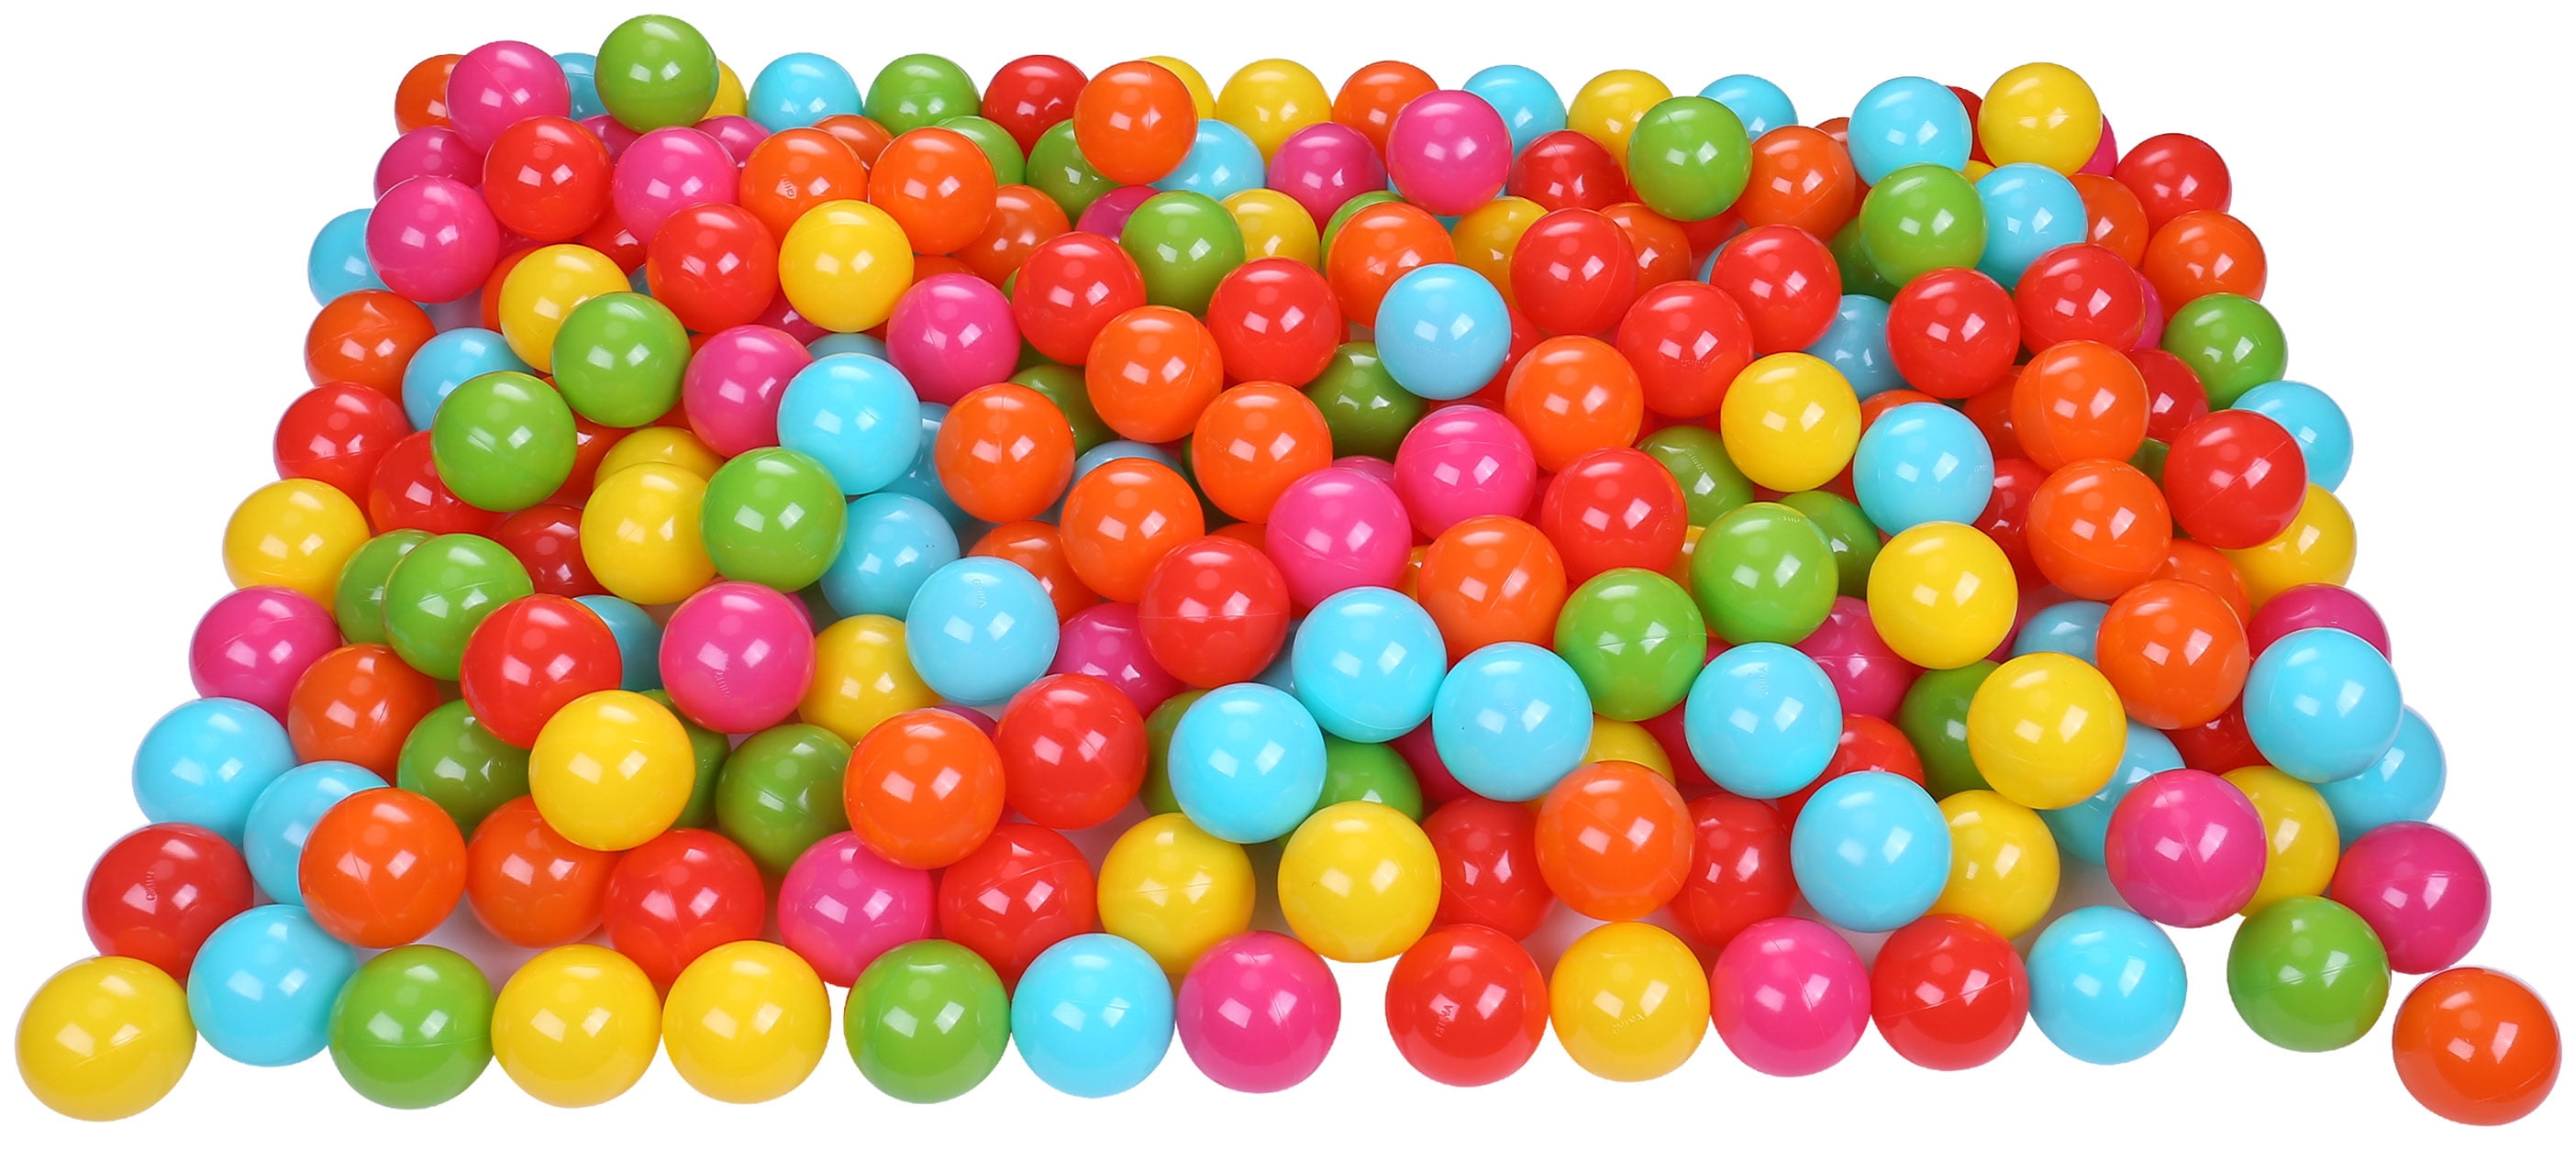 Click N Play Pack of 200 Phthalate Free BPA Free Crush Proof Plastic Ball Pit Balls 6 Bright Colors in Reusable and Durable Storage Mesh Bag with Zipper